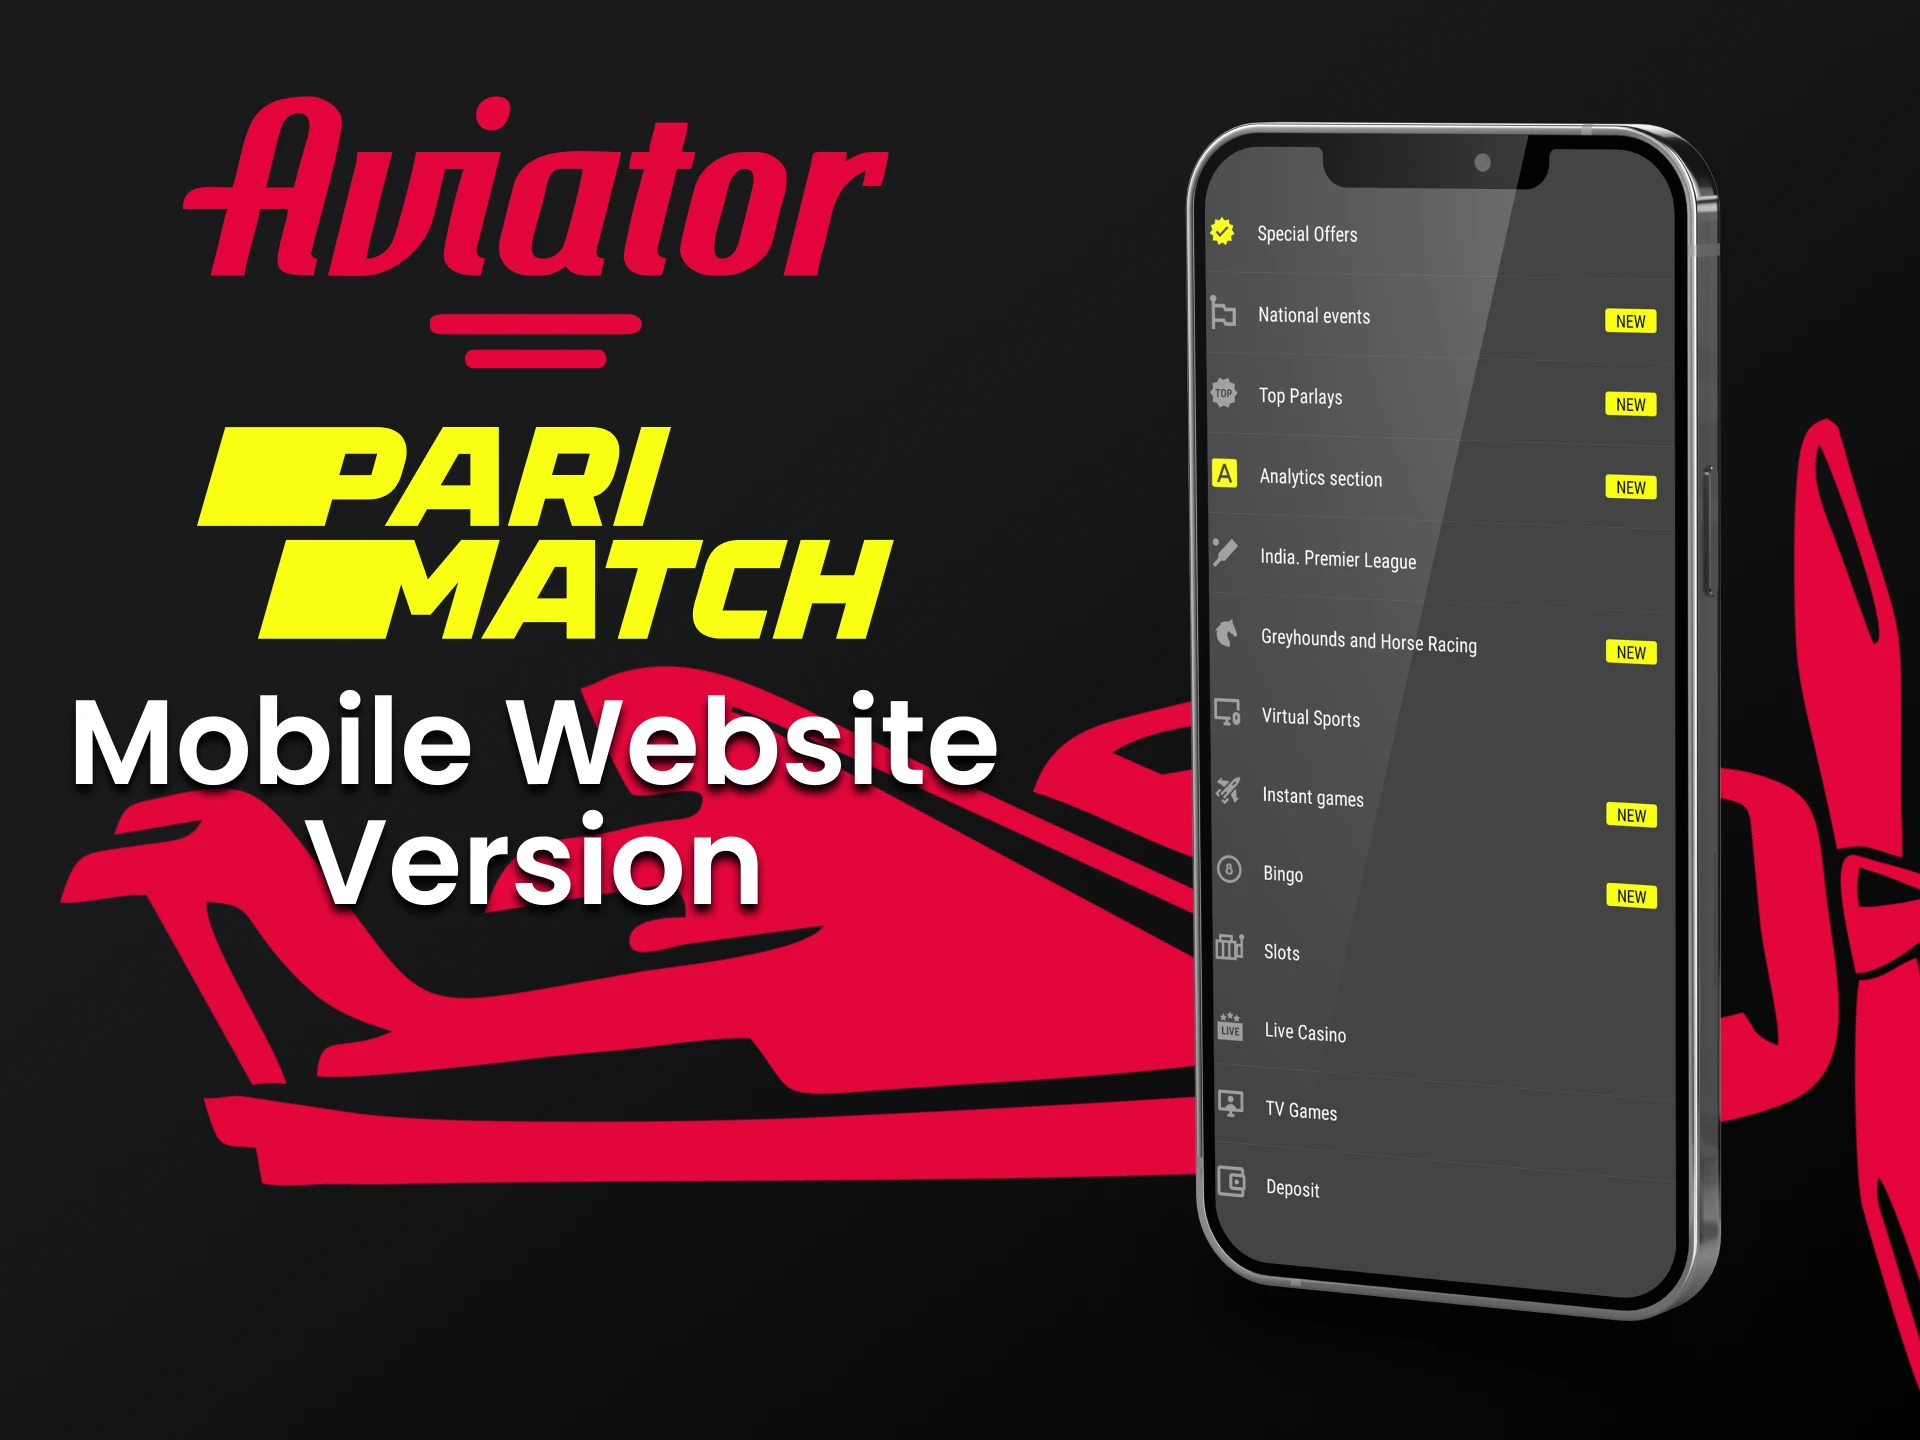 You can use your smartphone to play Aviator at Parimatch.